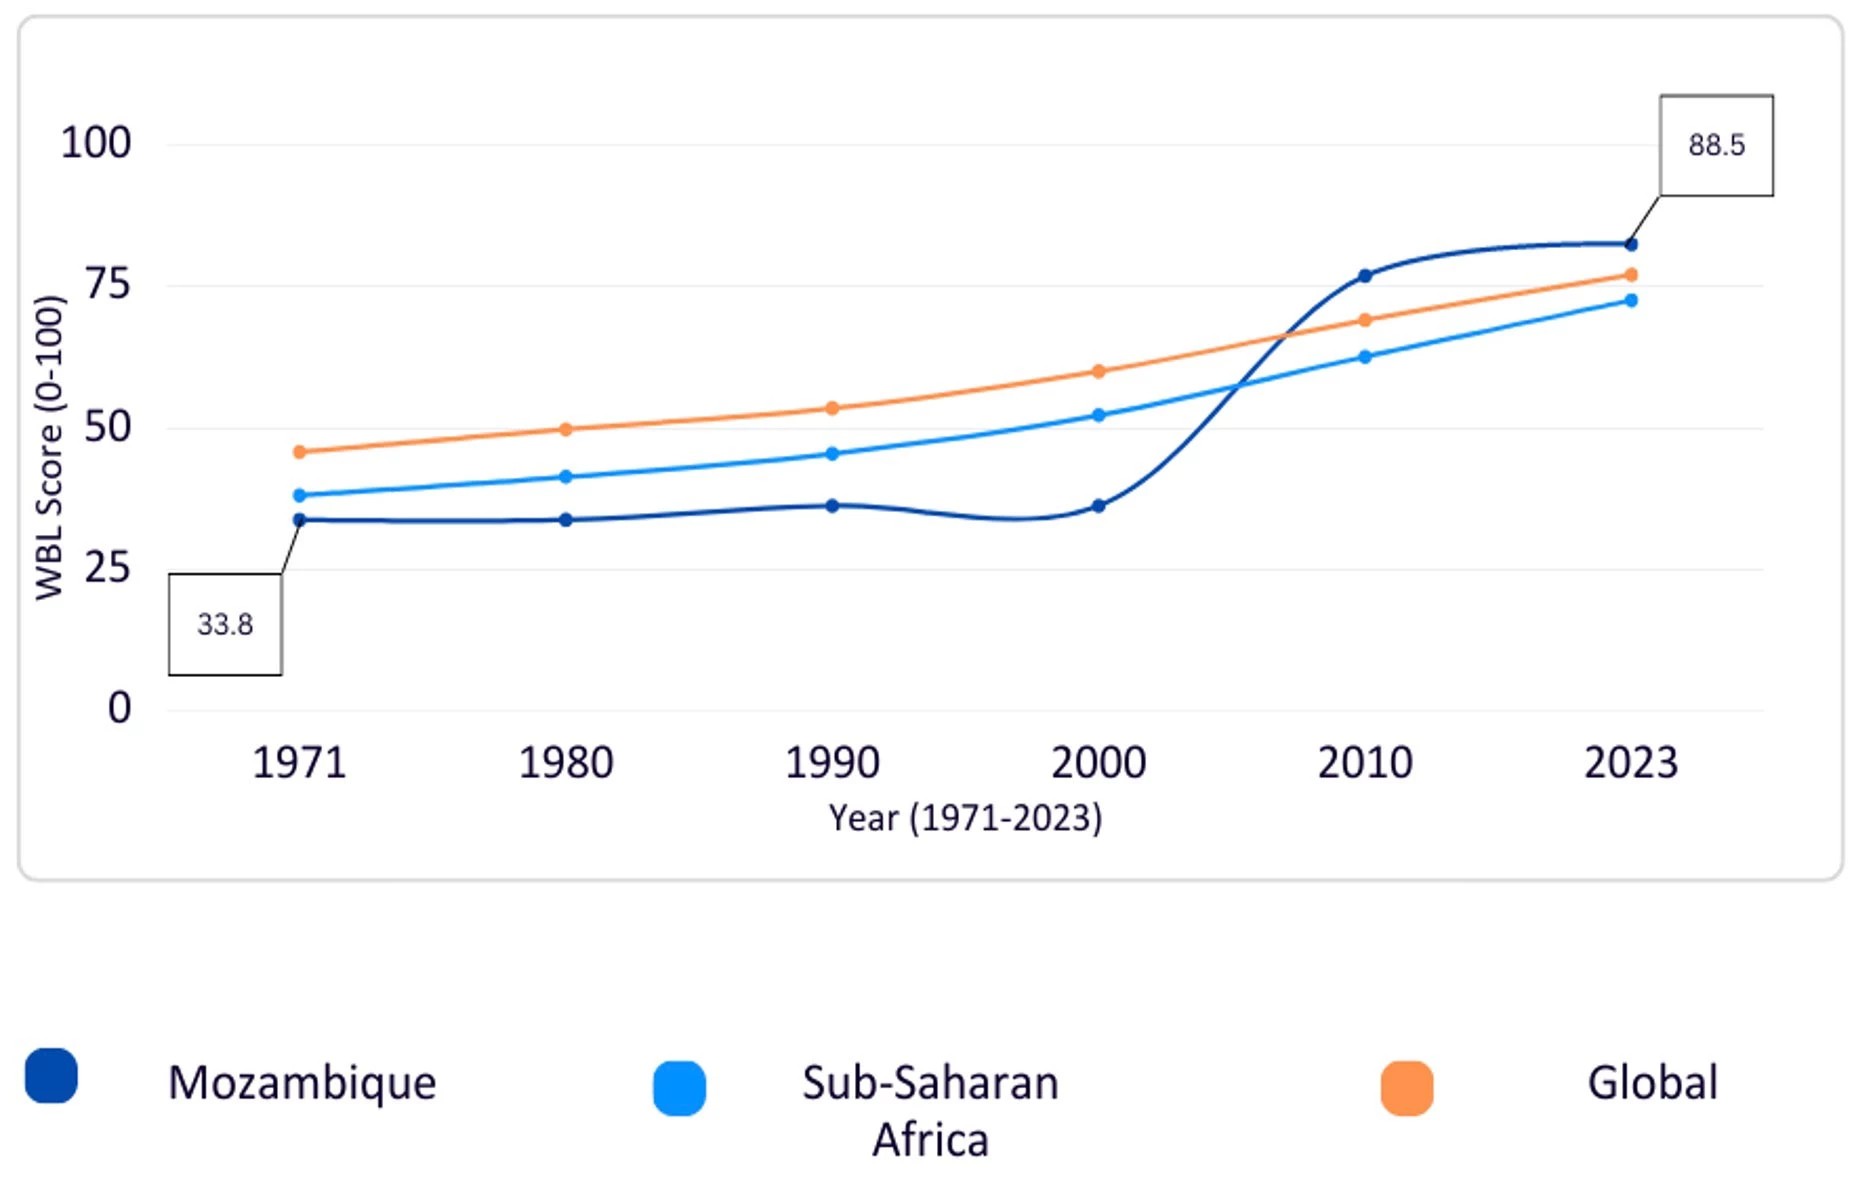 Figure 1. Mozambique?s Women, Business and the Law score over time in comparison to Sub-Saharan African region and global scores 